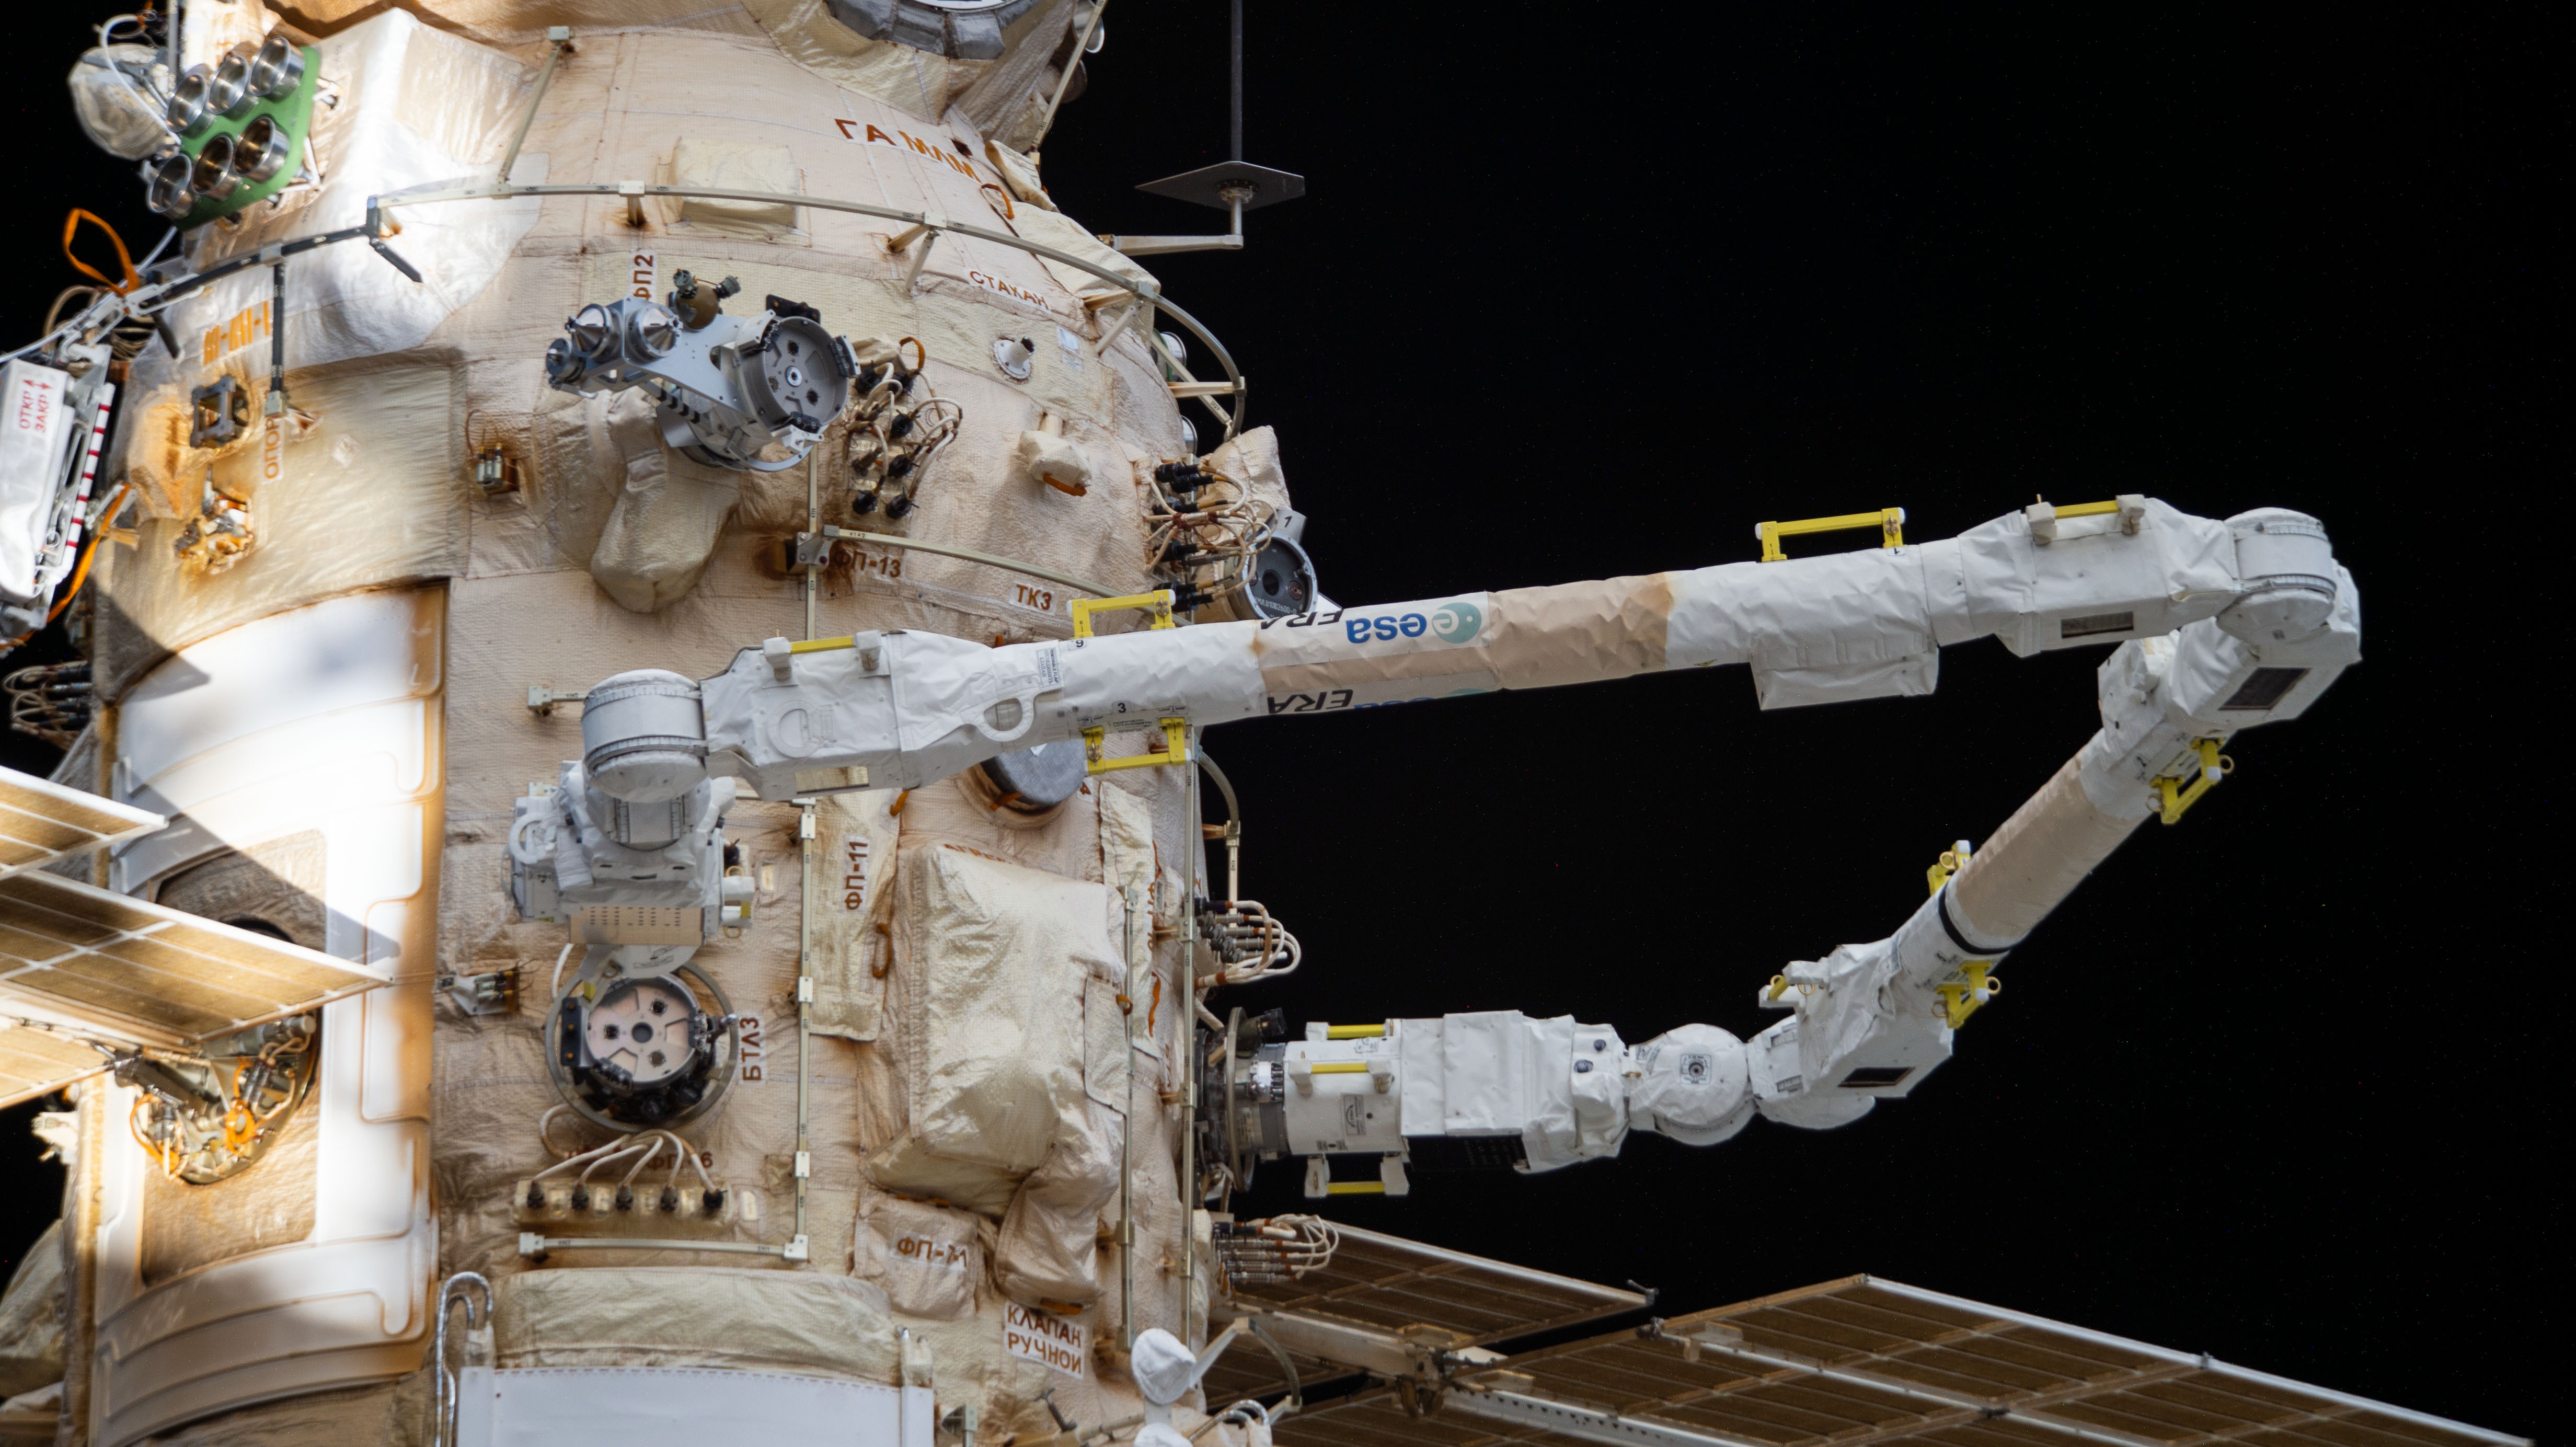 Problem with spacesuit forces early end to Russian spacewalk